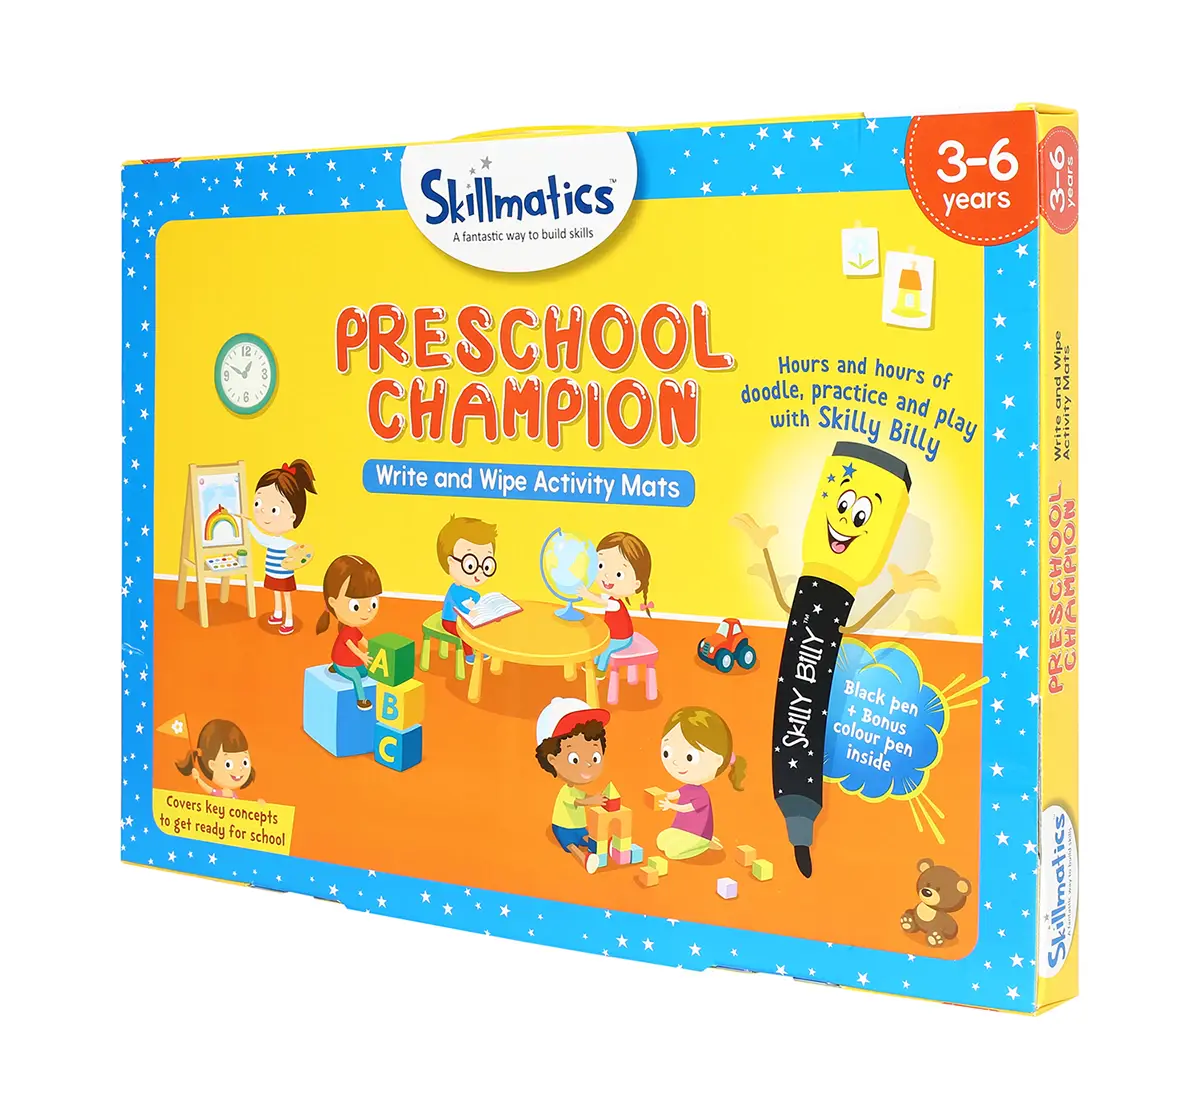 Skillmatics Educational Game: Preschool Champion, 3-6 Years, Multi Color Games for Kids age 3Y+ 